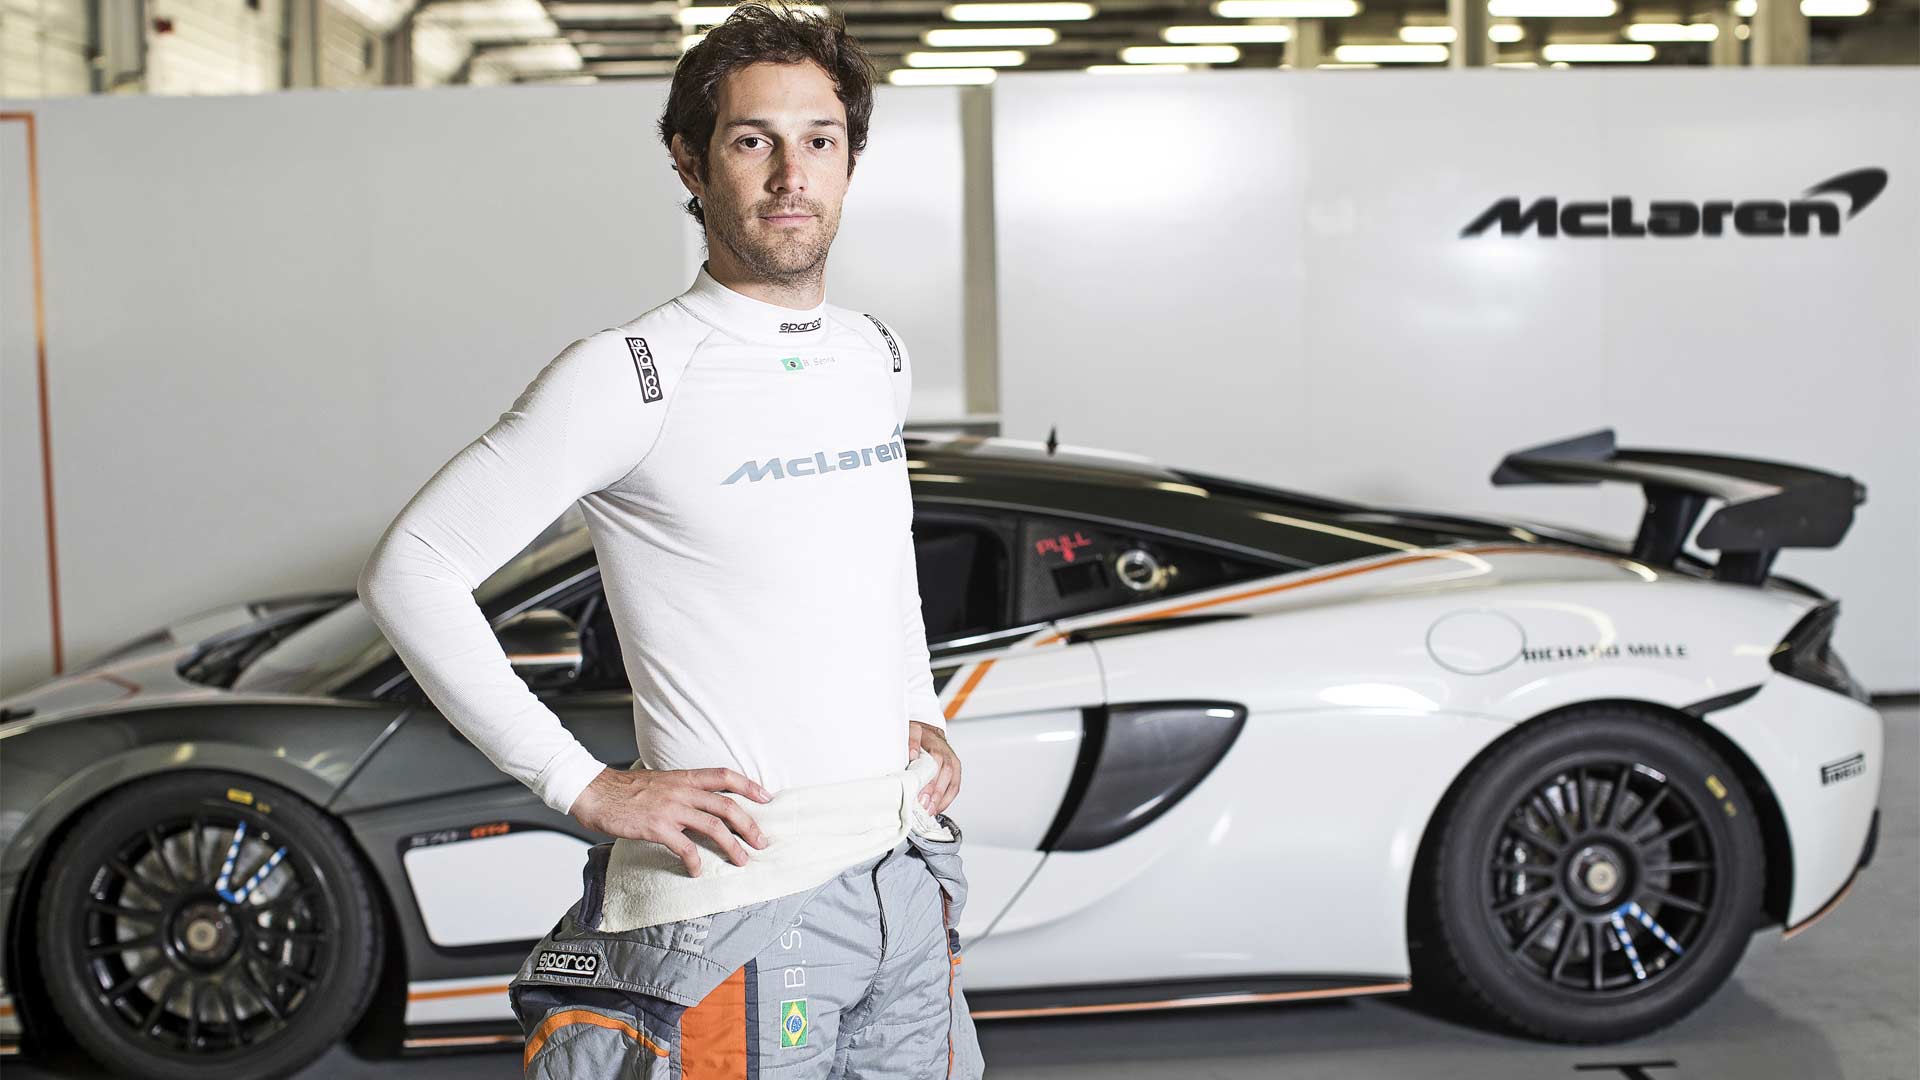 McLaren-and-Sparco-world's-lightest-FIA-certified-race-suit_3